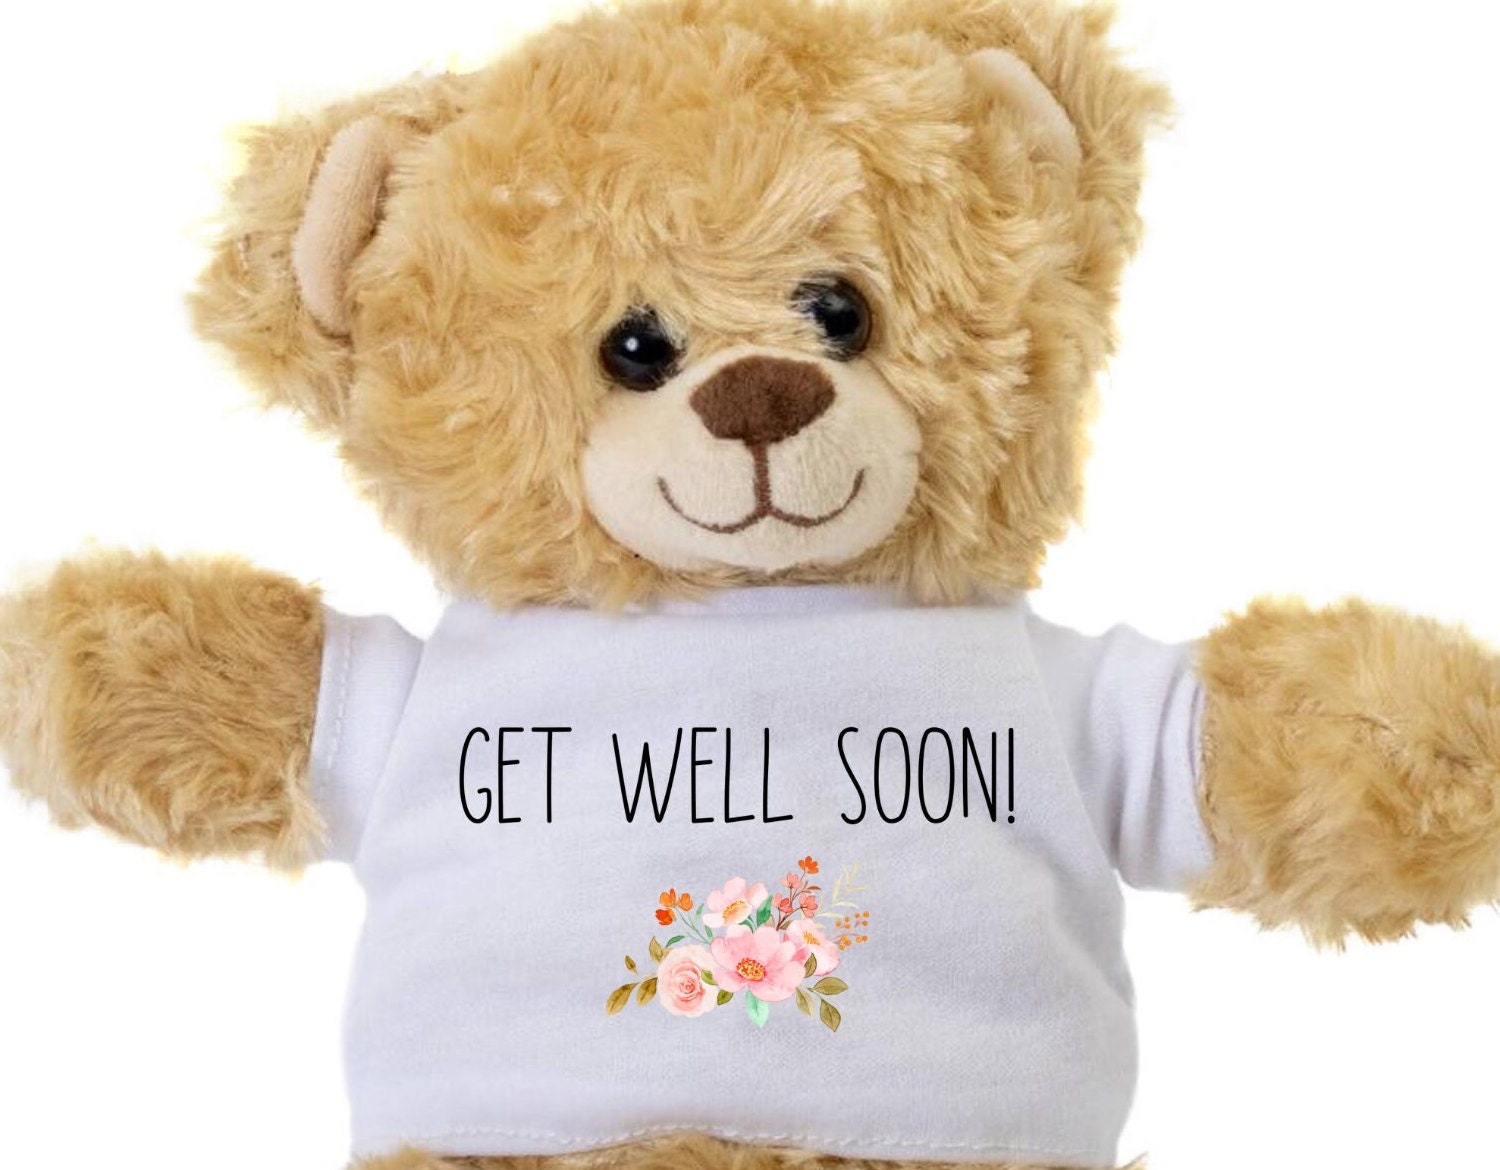 Get Well Soon Gifts for Kids, Get Well Teddy Bear, Get Well Gifts for Women,  Get Well Soon Gifts for Kids We're Sorry You Are Sick 